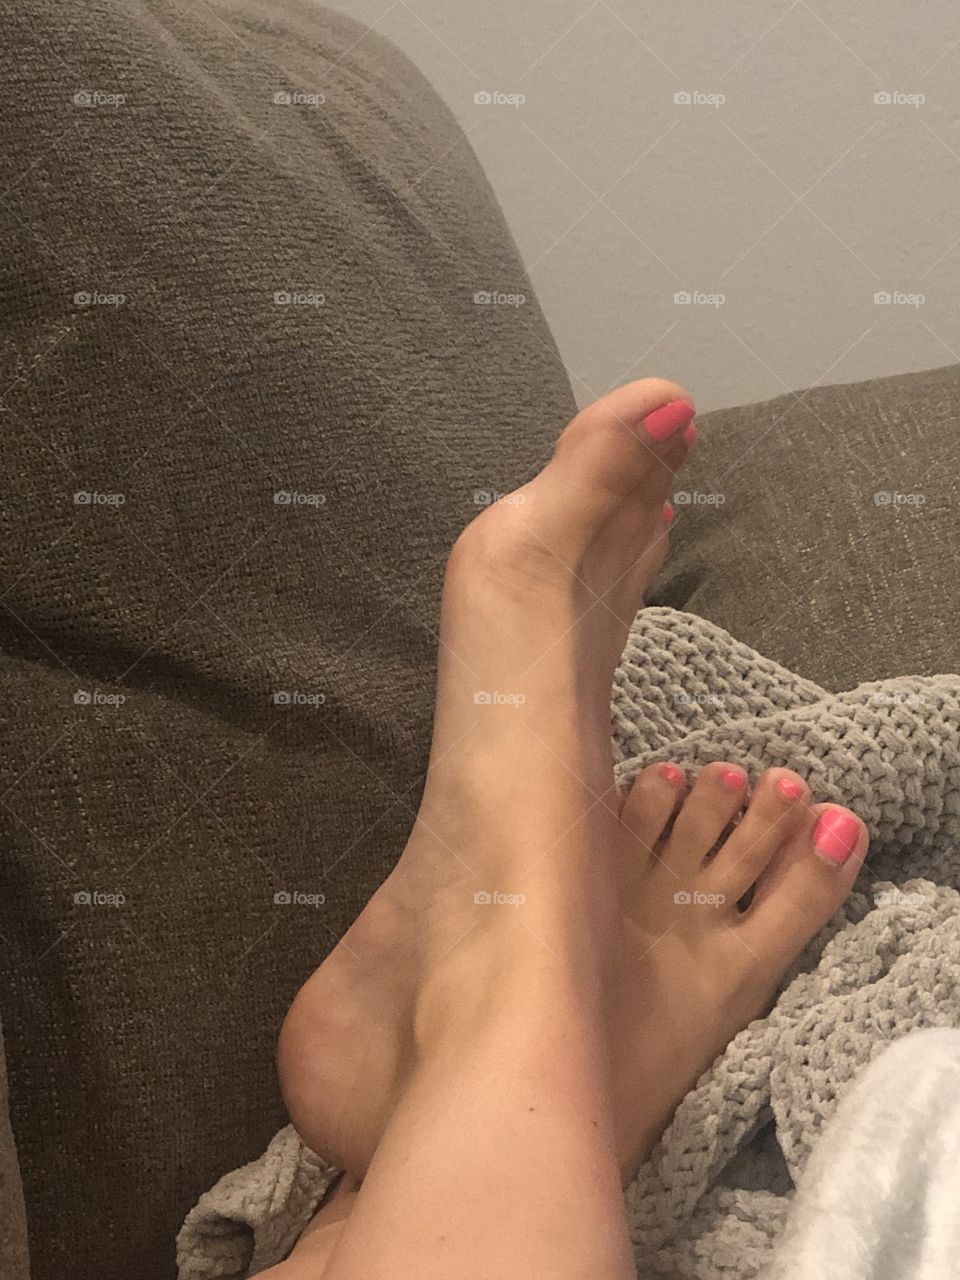 Feet pictures for sale.